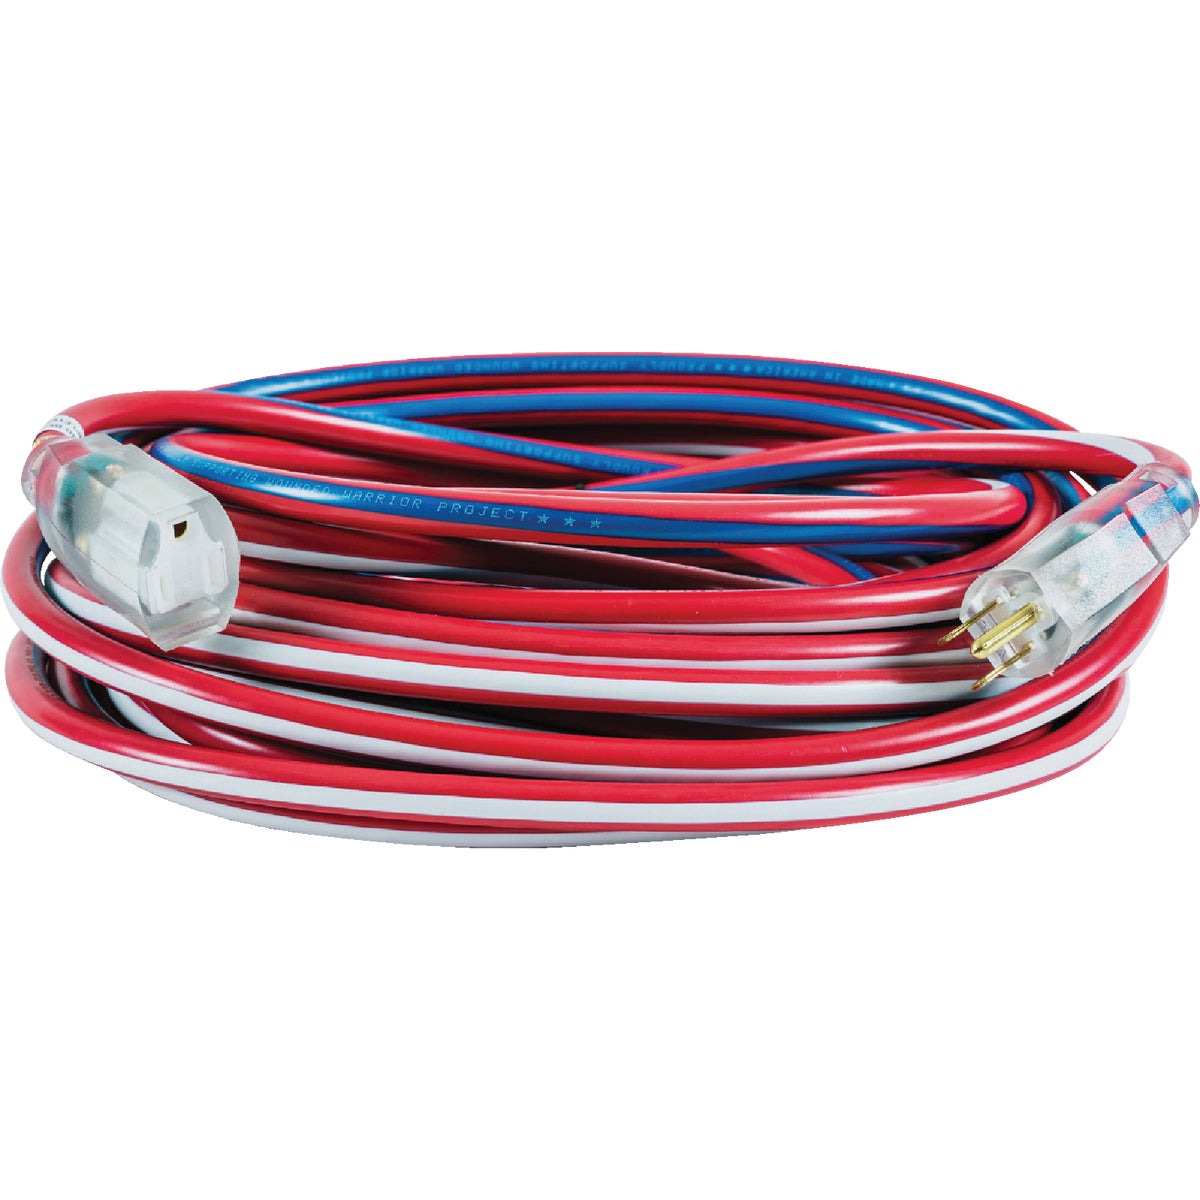 Southwire Wounded Warrior Project 25 Ft. 12/3 Indoor/Outdoor Red, White, & Blue Striped Patriotic Extension Cord